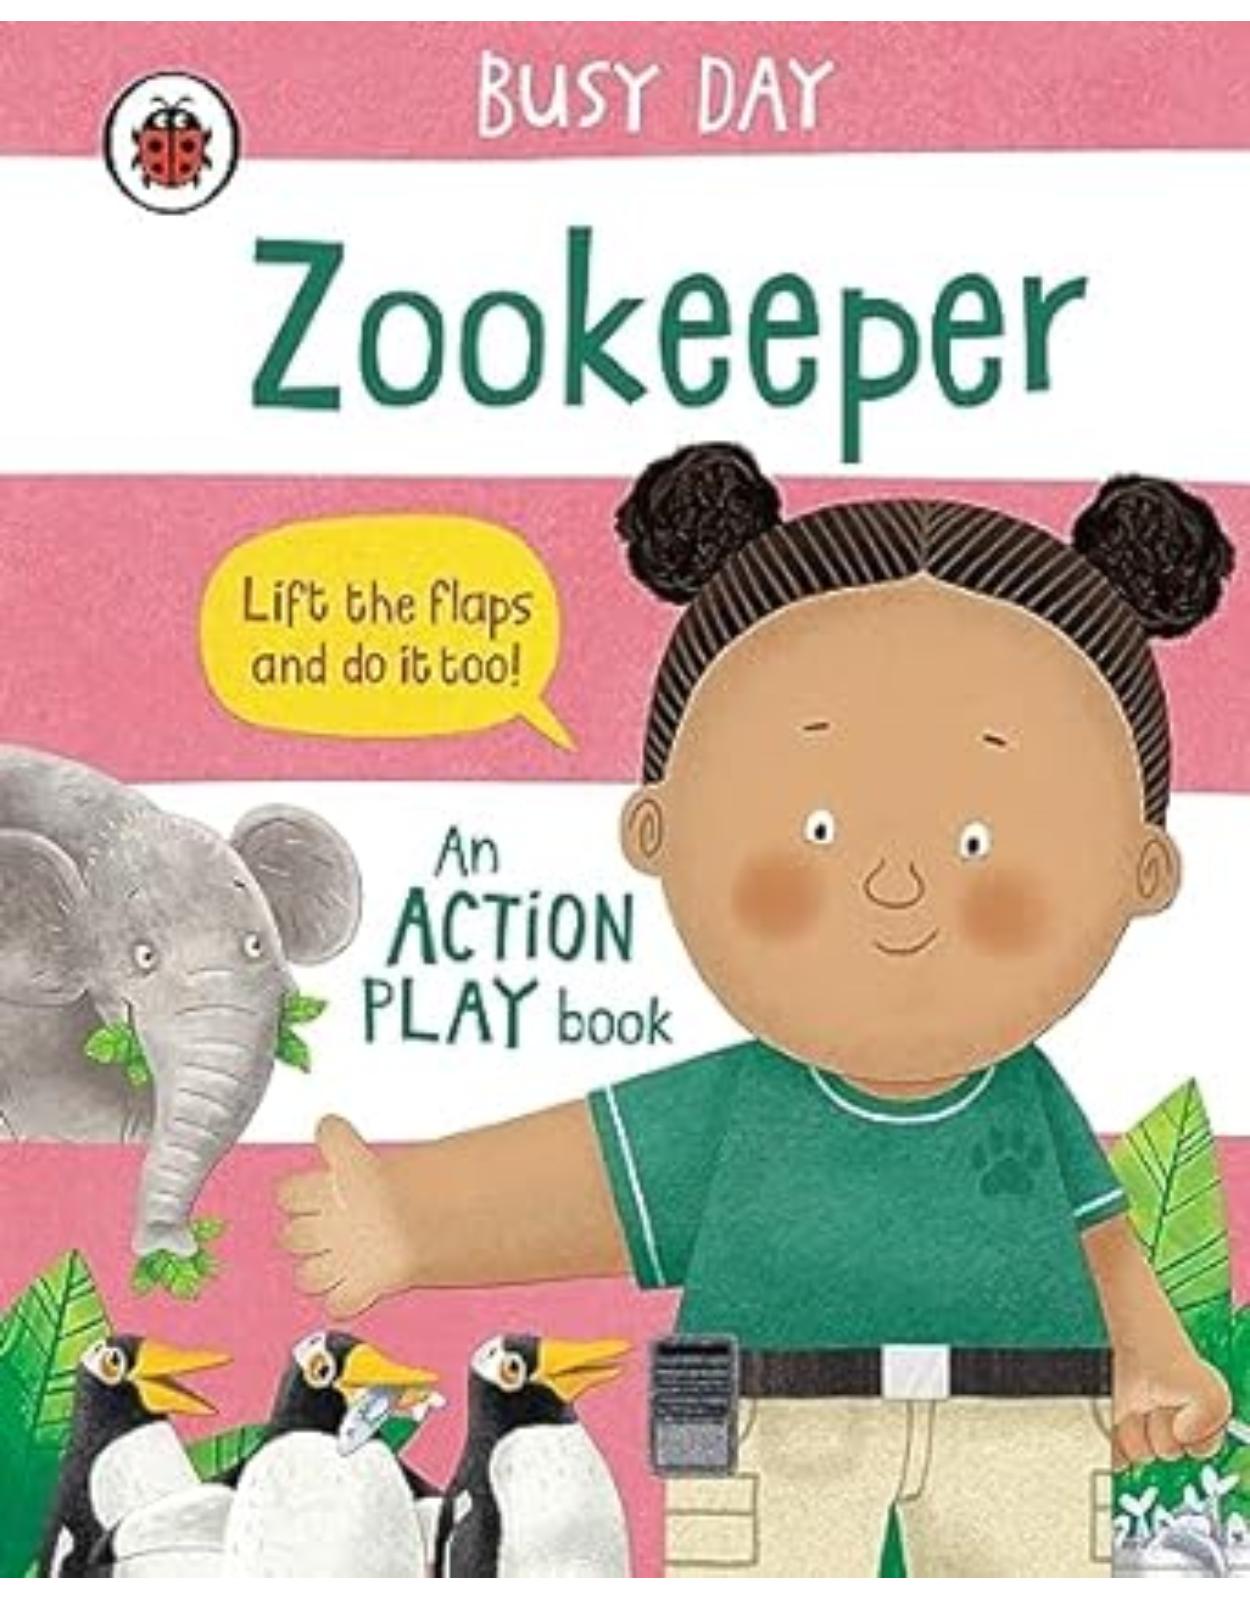 Busy Day: Zookeeper